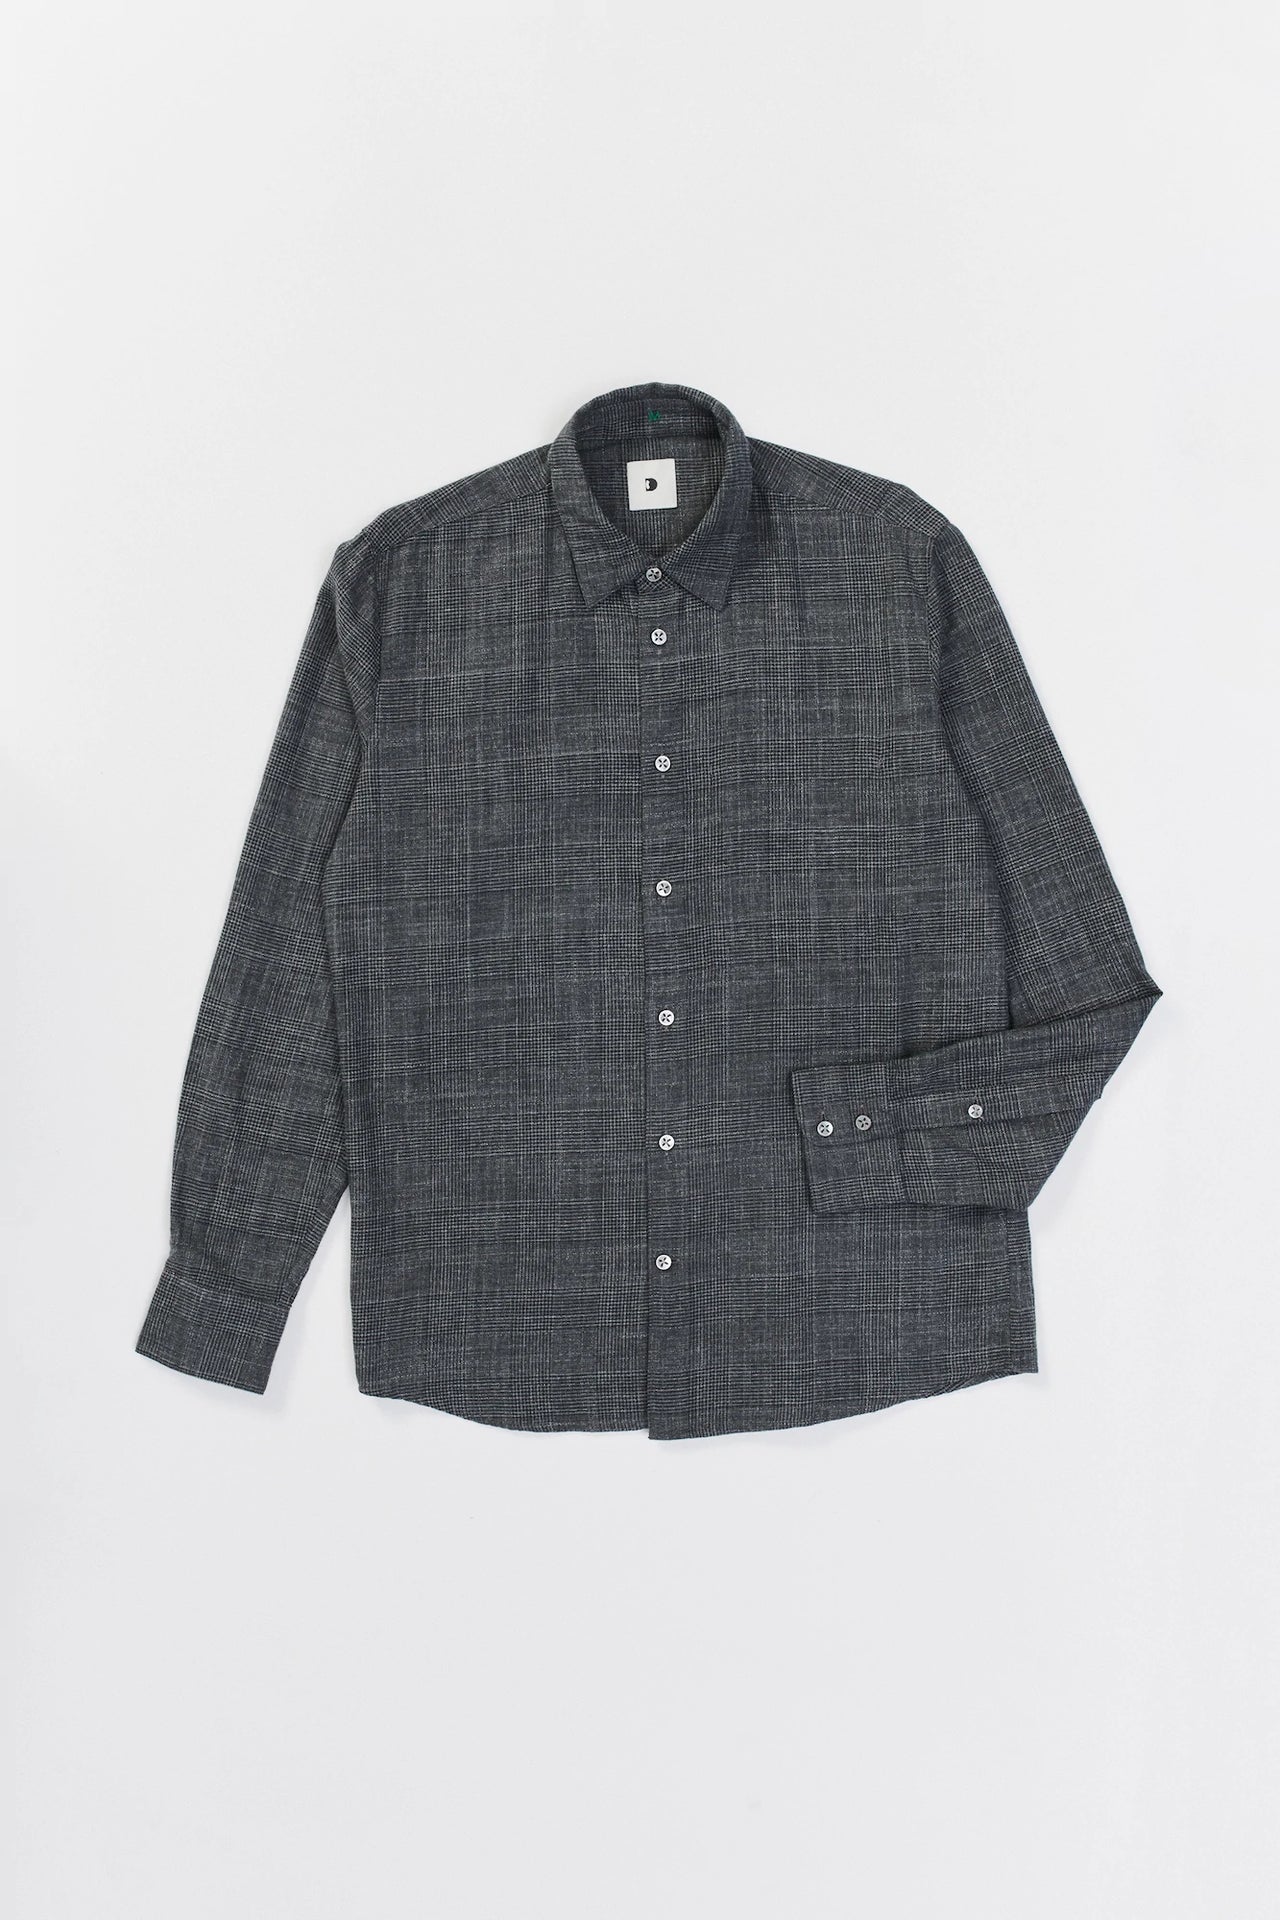 Feel Good Shirt in a Dark Grey Prince of Wales Tonal Chequers in a Fine Italian Cotton